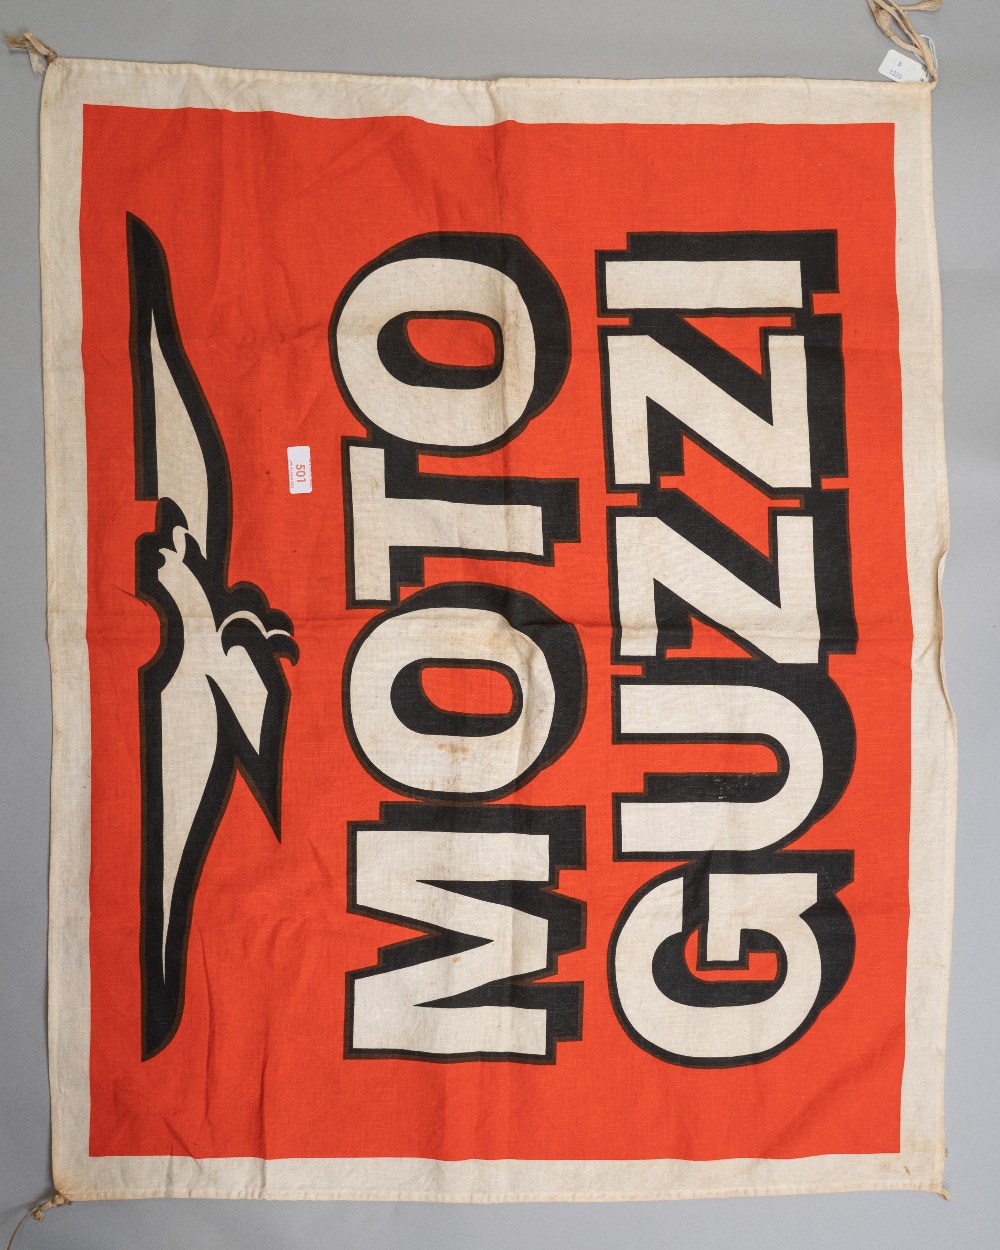 A vintage cloth advertising banner or flag for Moto guzzi motorcycles, approx 34'x 28'.